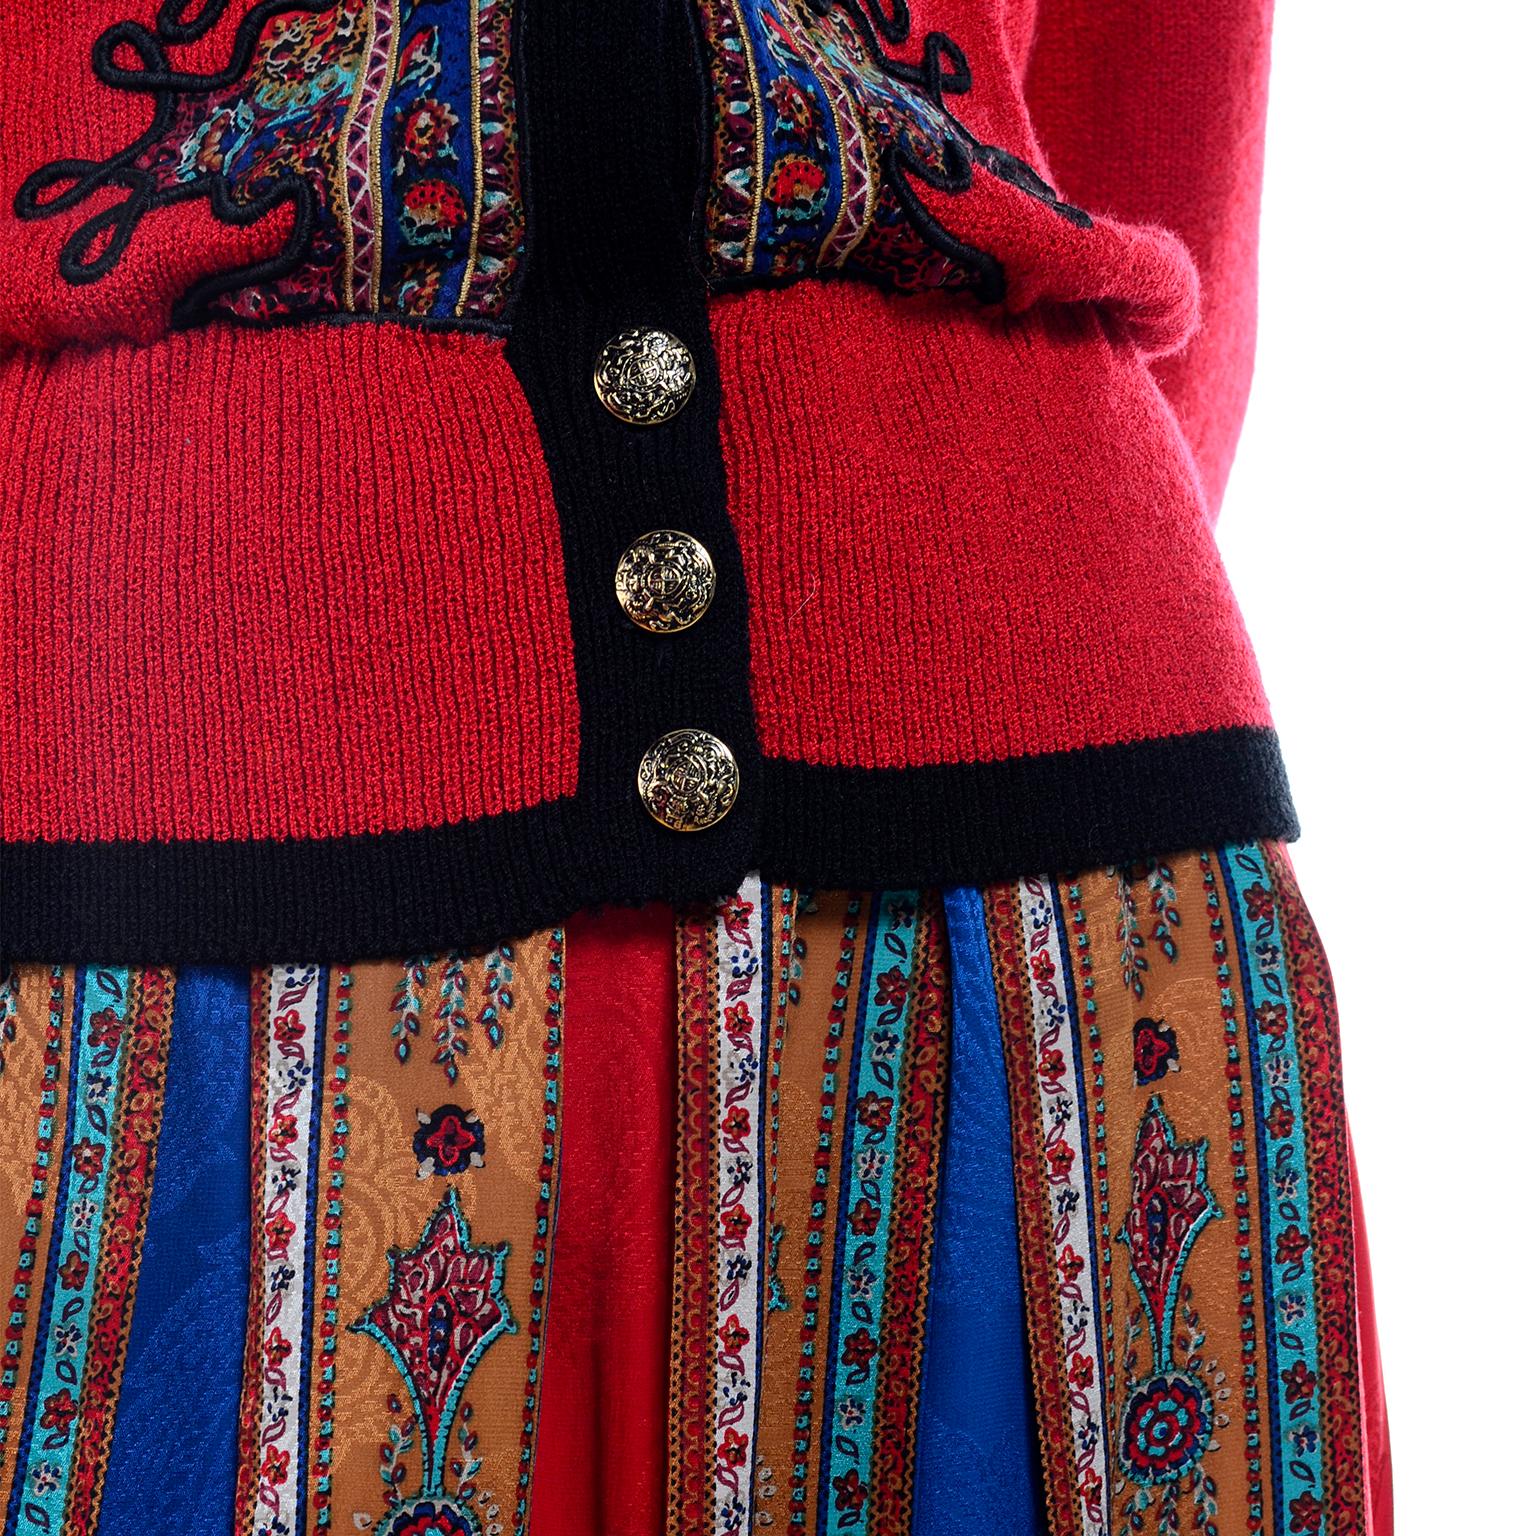 Women's Uni Collection by Anne Crimmins Pattern Mix Silk Skirt & Sweater in Red & Blue